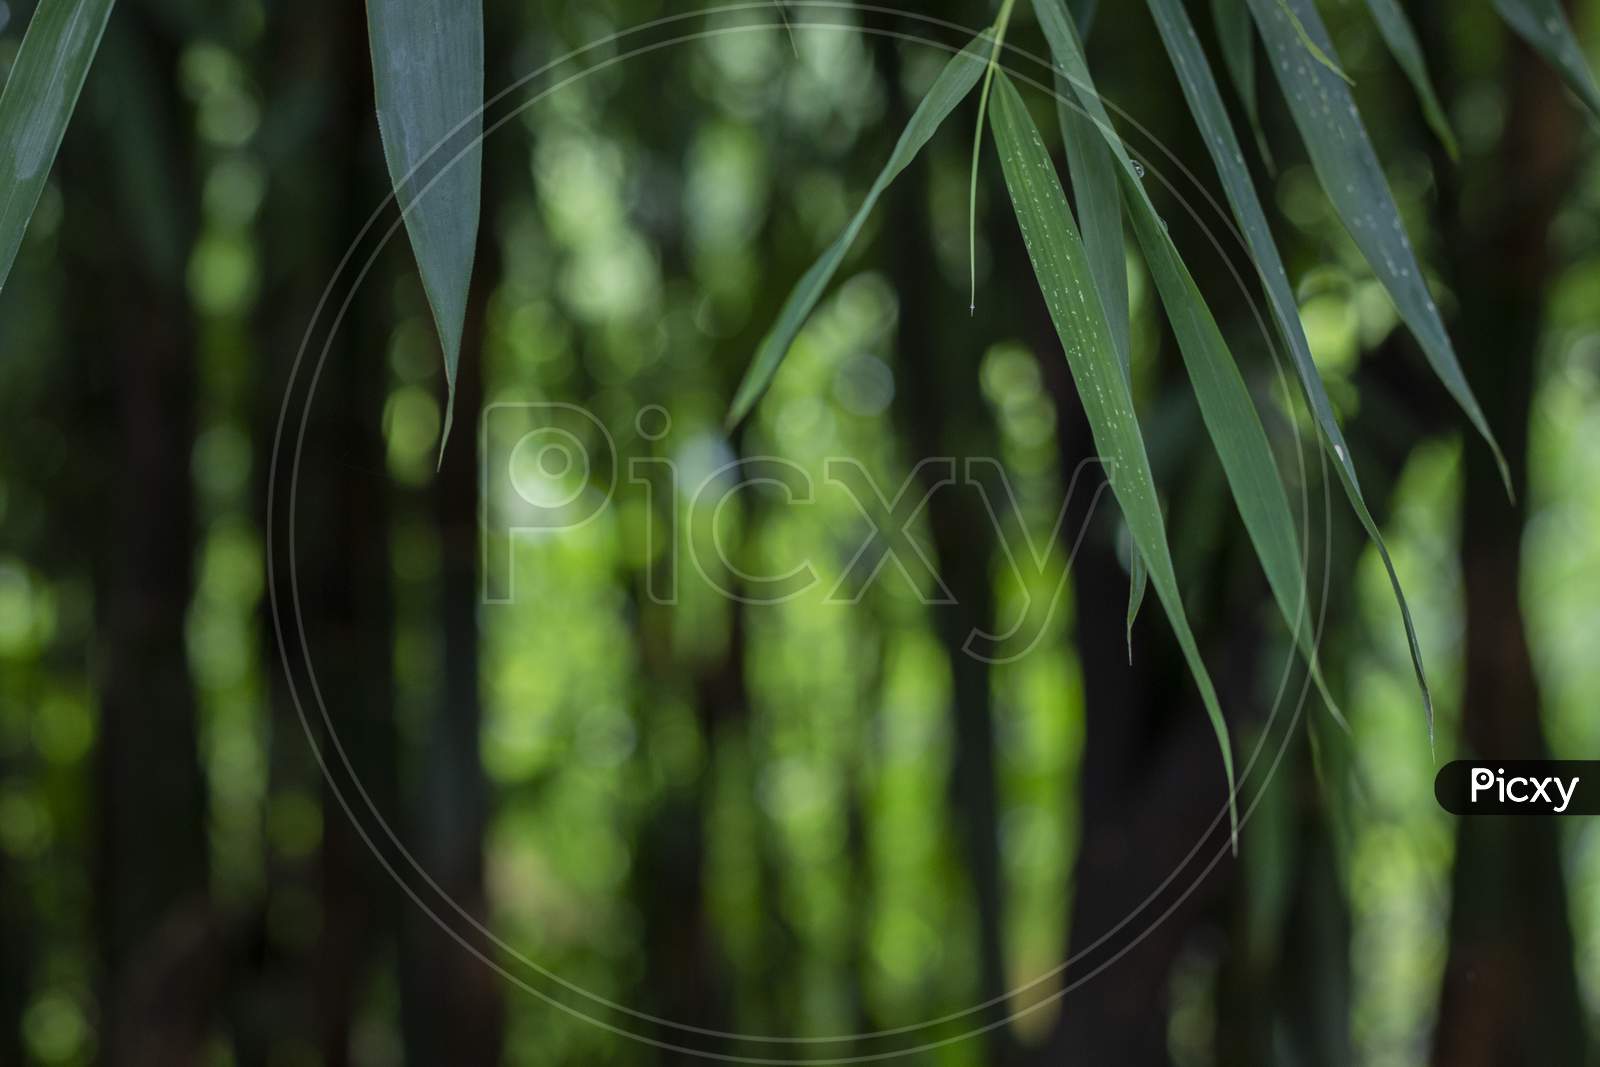 Asian Bamboo Forest Green Bamboo Leaves. Bamboo Leaves Background, Fresh Green Bamboo Bush Background. Photos Of Green Bamboo Leaves .